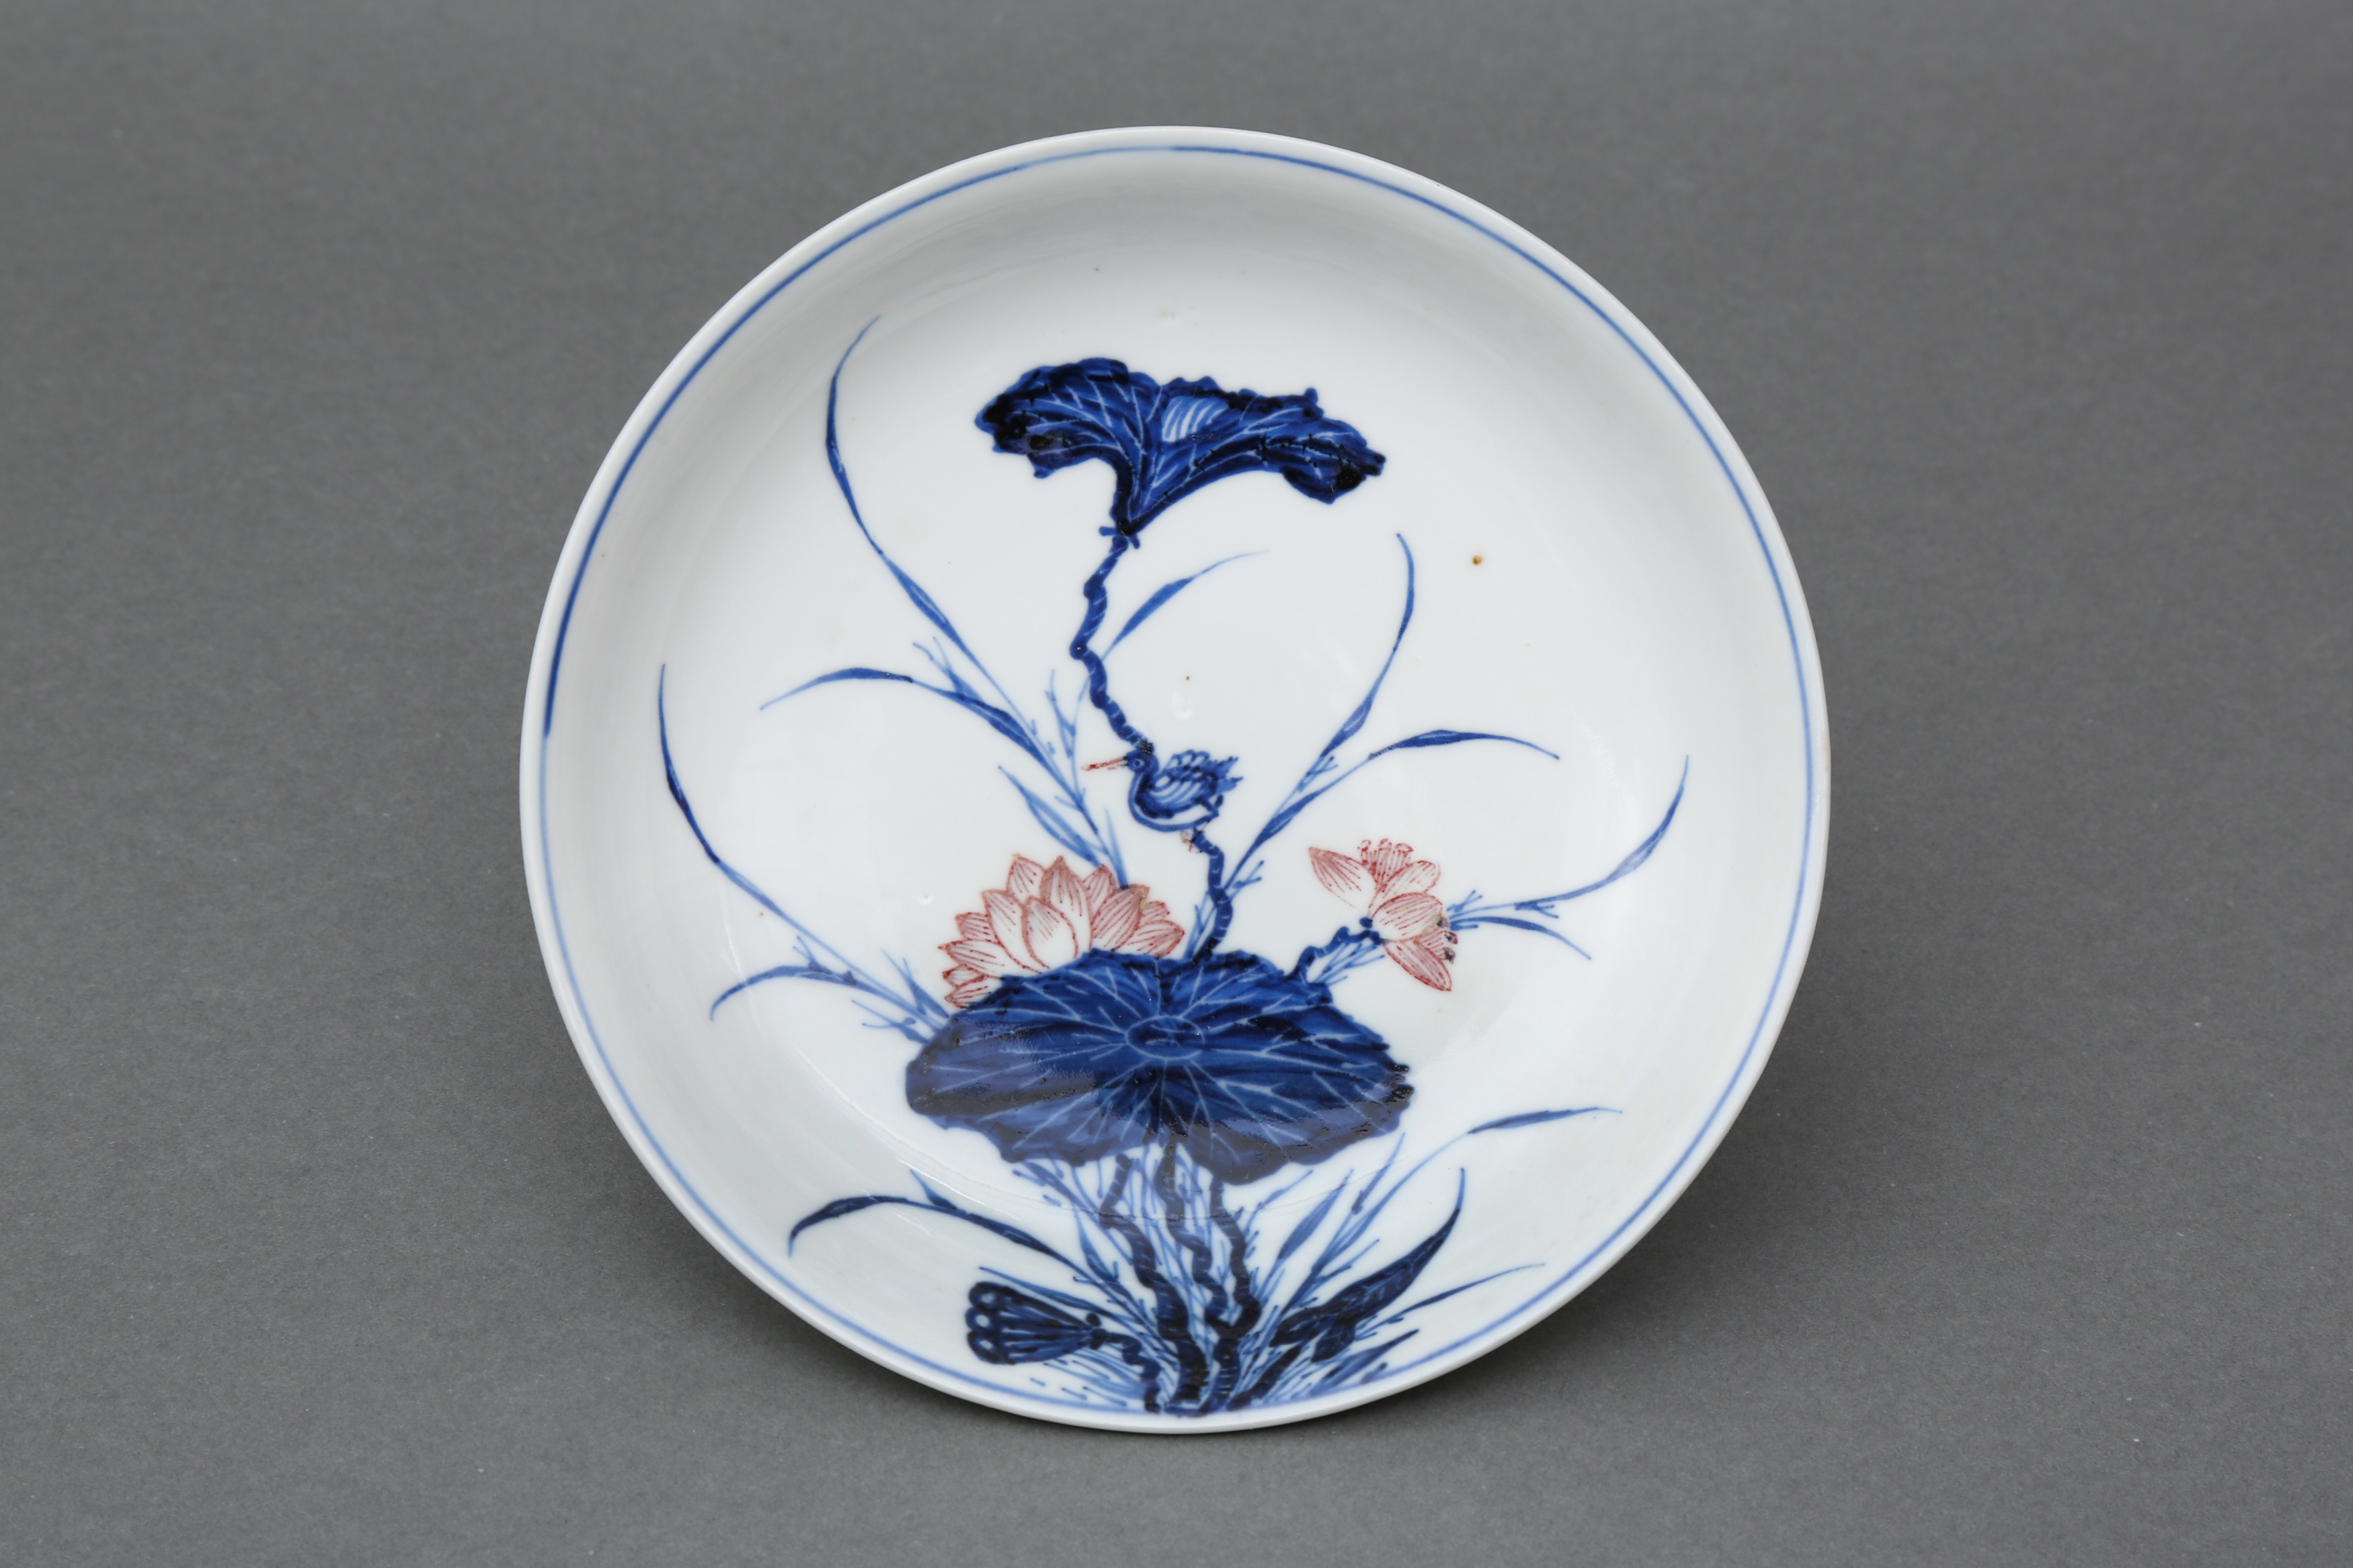 A RARE CHINESE BLUE AND WHITE AND COPPER-RED 'LOTUS AND EGRET' DISH 清康熙 青花釉裡紅一路連科圖盤